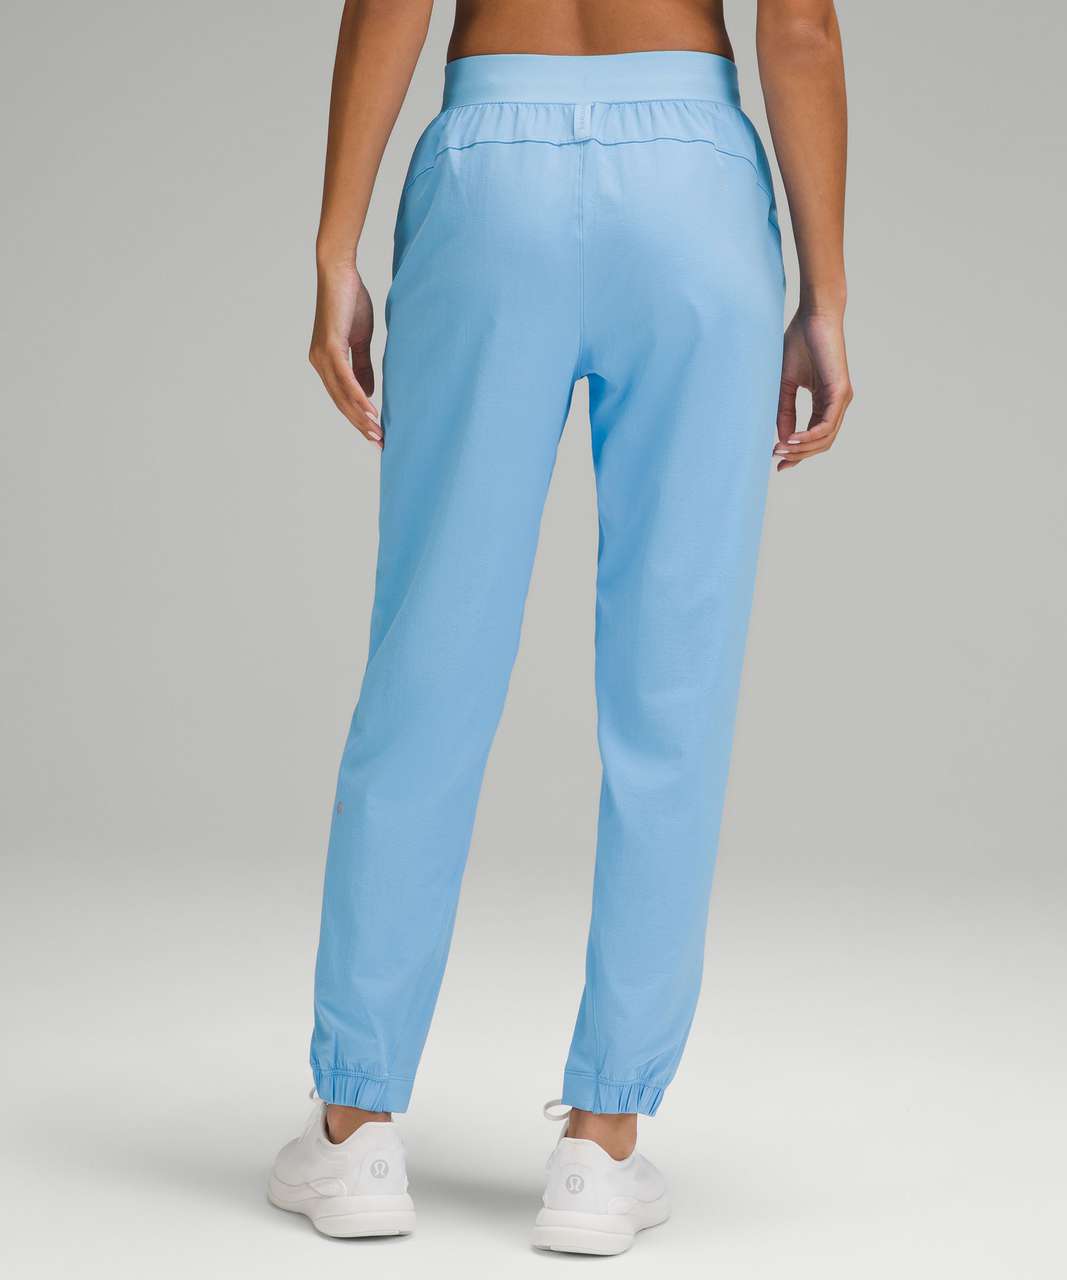 lululemon athletica License To Train High-rise Pants in Blue